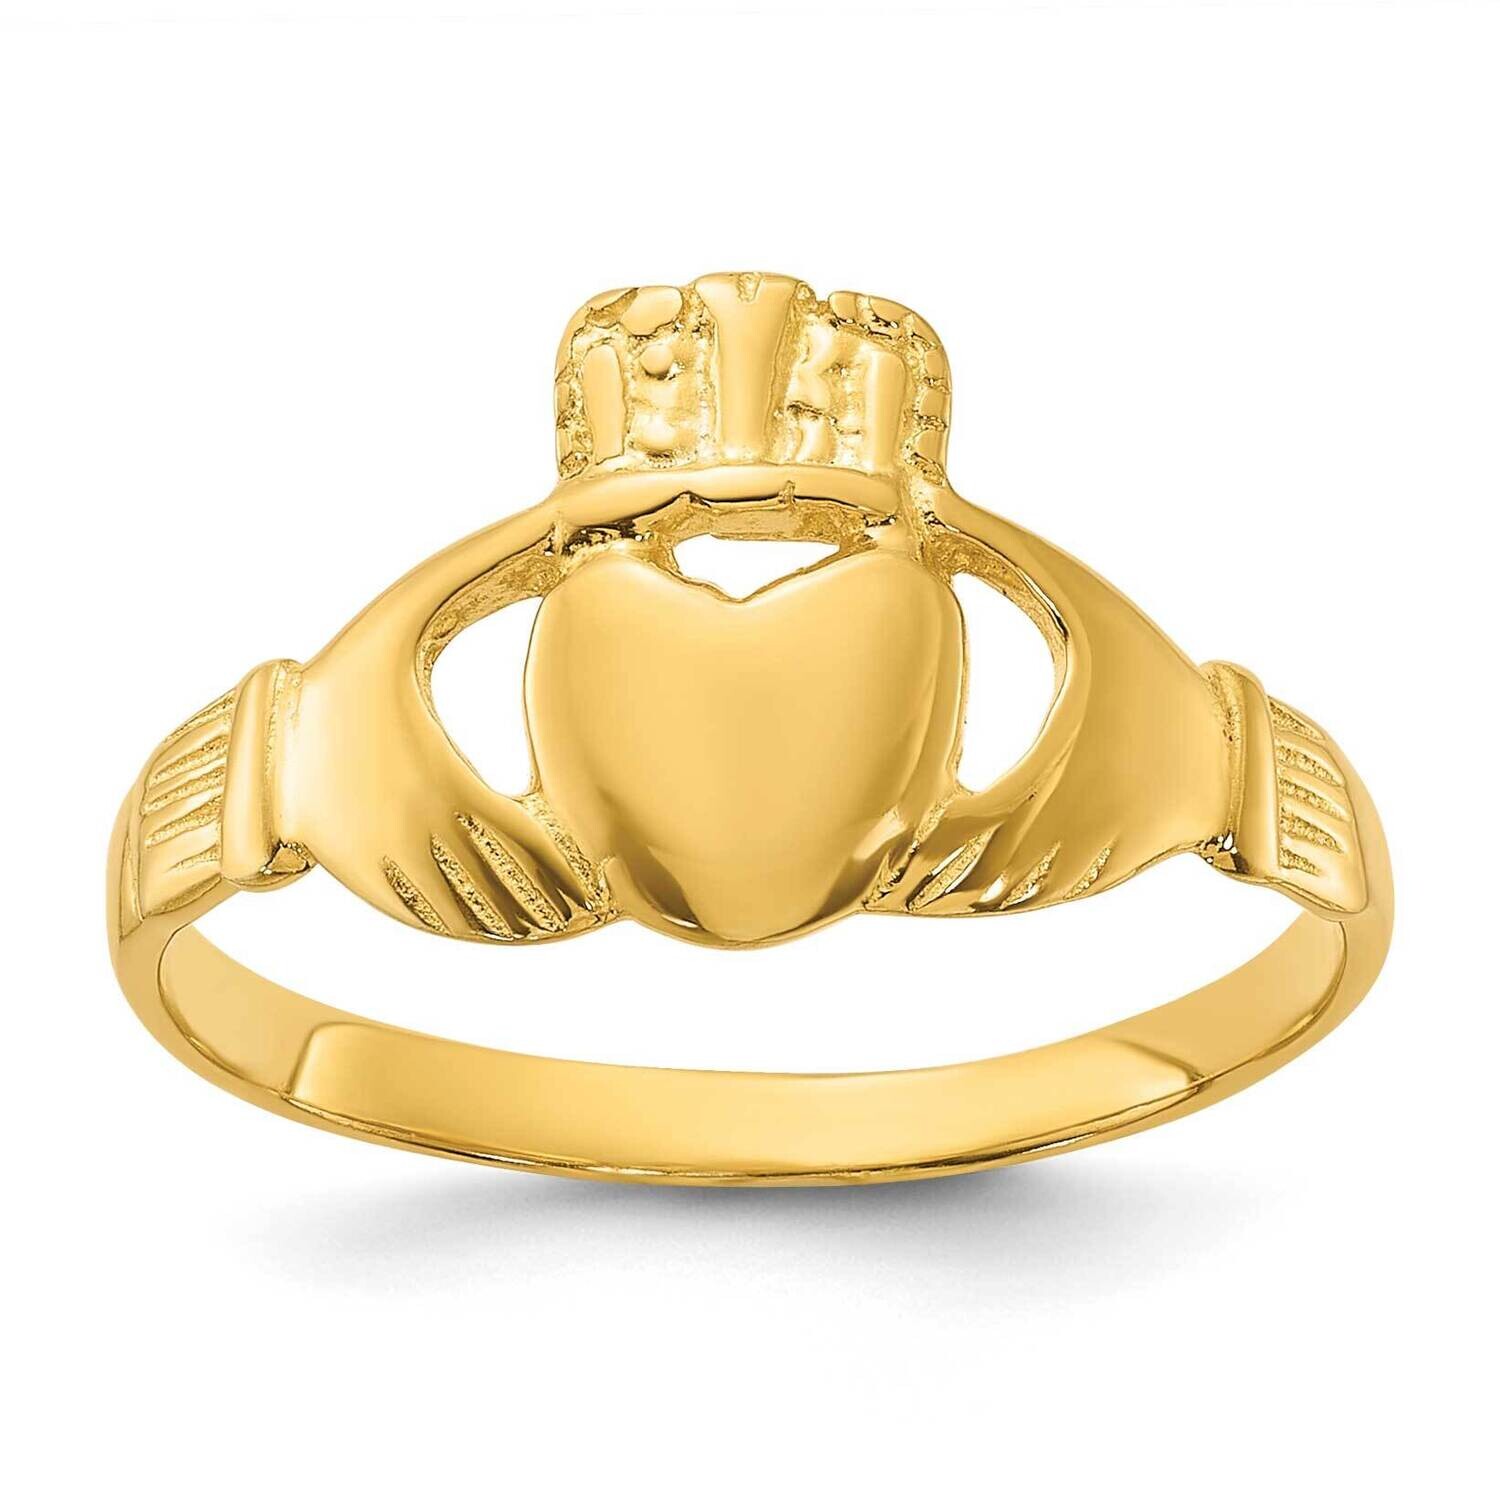 Gold-Tone Polished Claddagh Ring Sterling Silver QR957GP